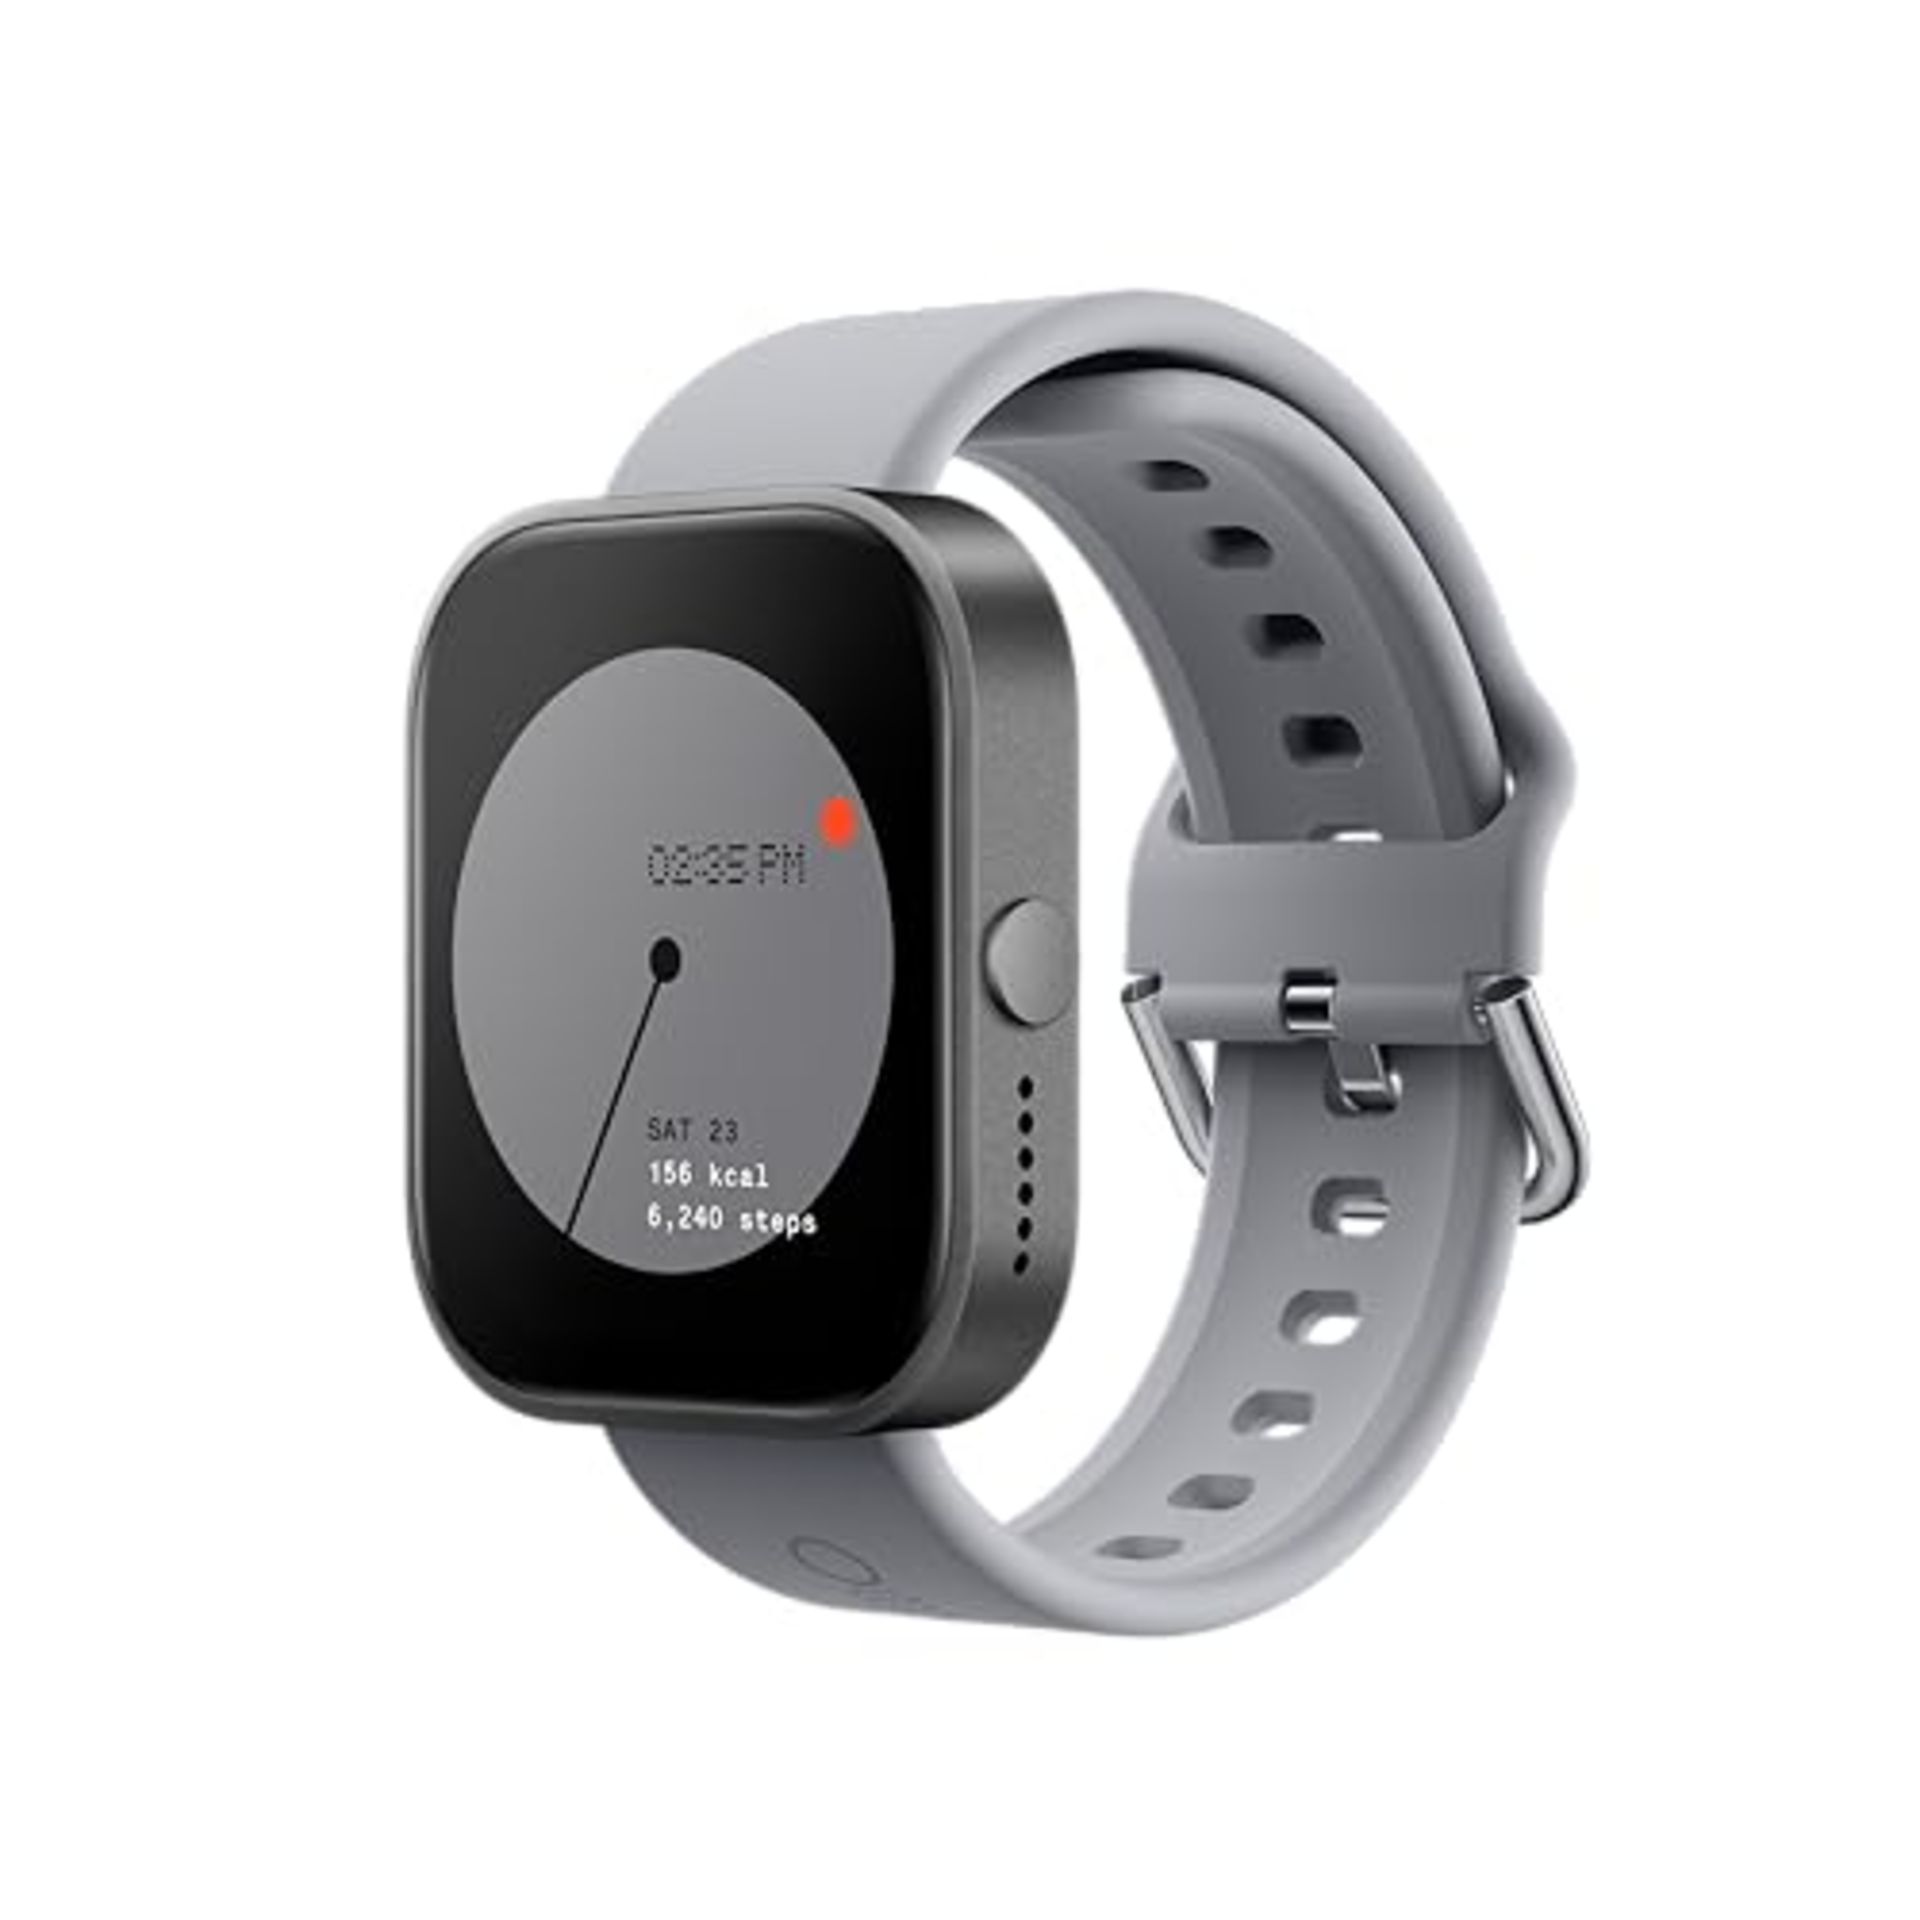 RRP £69.00 CMF by Nothing Watch Pro Smartwatch with 1.96' AMOLED screen, fitness tracker, integra